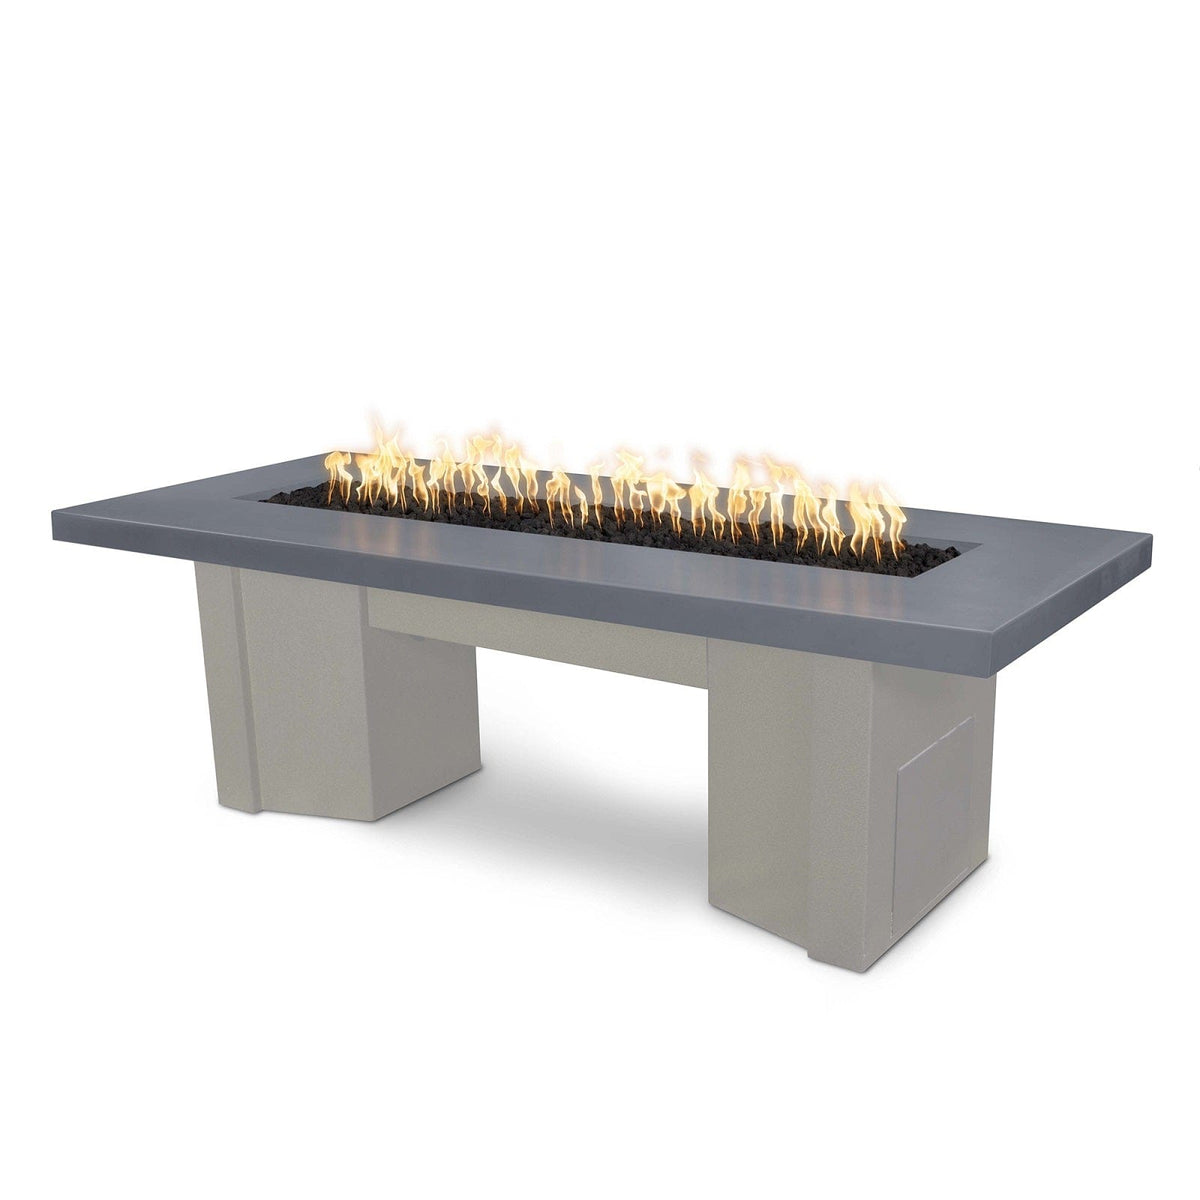 The Outdoor Plus Fire Features Gray (-GRY) / Pewter Powder Coated Steel (-PEW) The Outdoor Plus 78&quot; Alameda Fire Table Smooth Concrete in Liquid Propane - 12V Electronic Ignition / OPT-ALMGFRC78E12V-LP